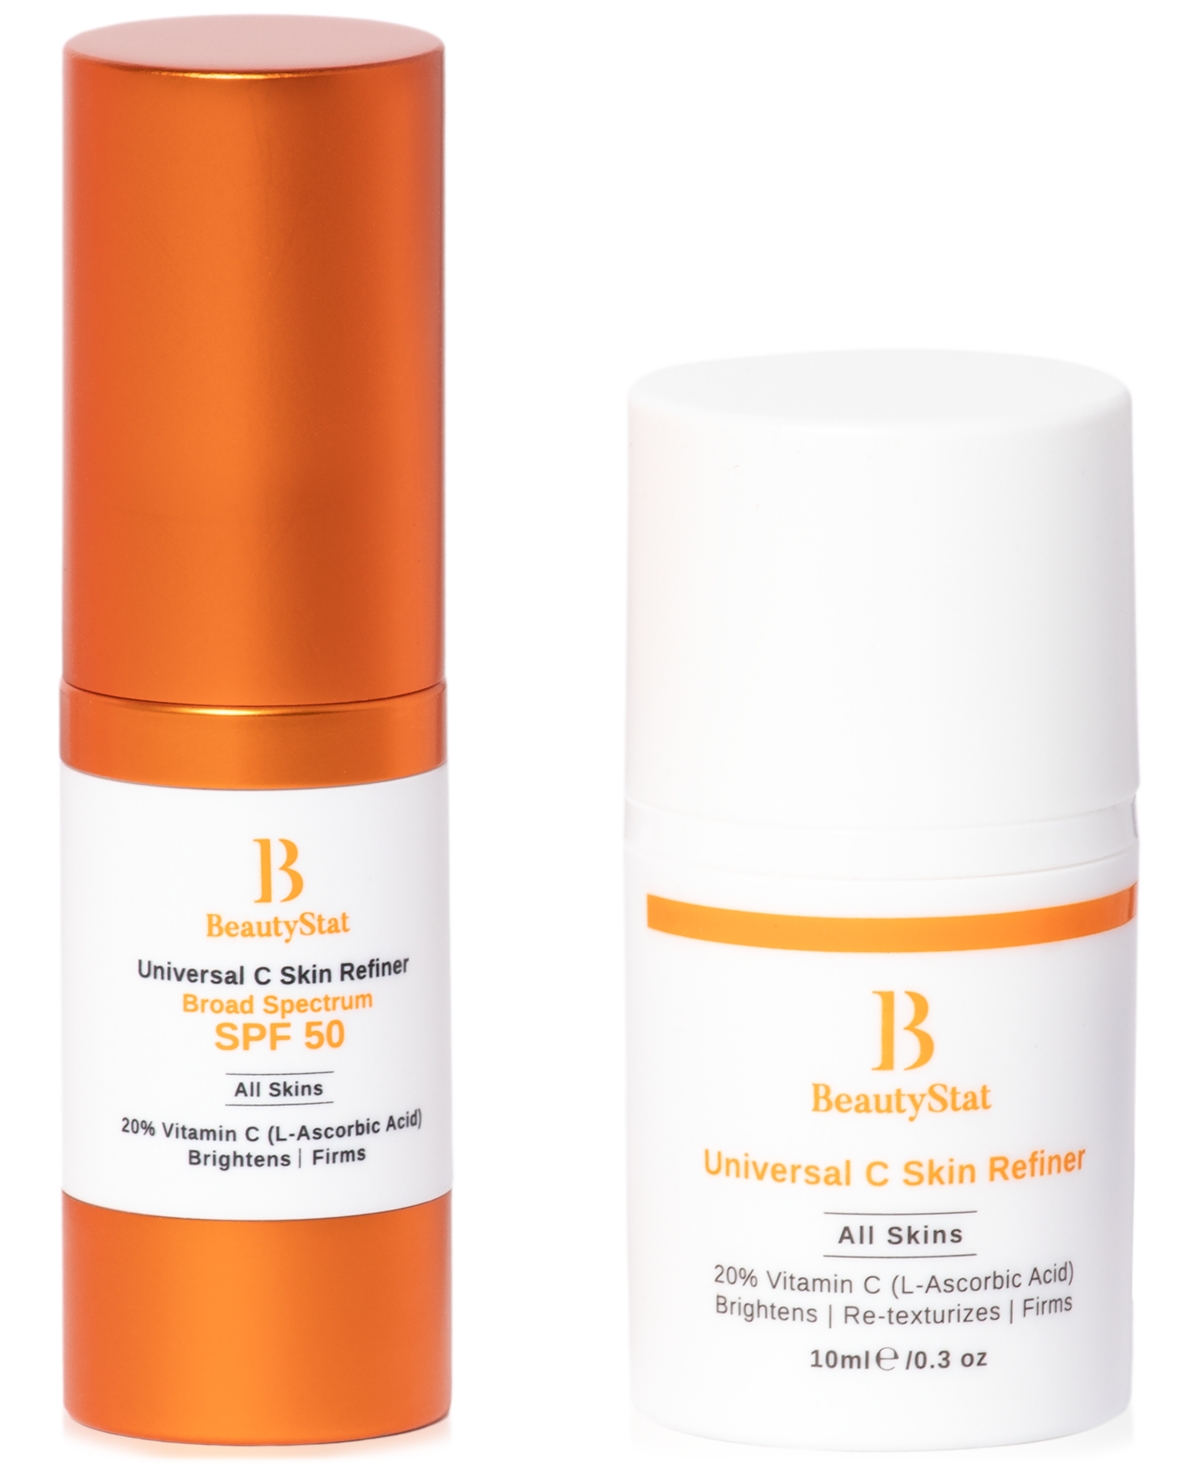 Beautystat 2-pc. Brighter Together Brightening Vitamin C Day & Night Serum Set In No Color